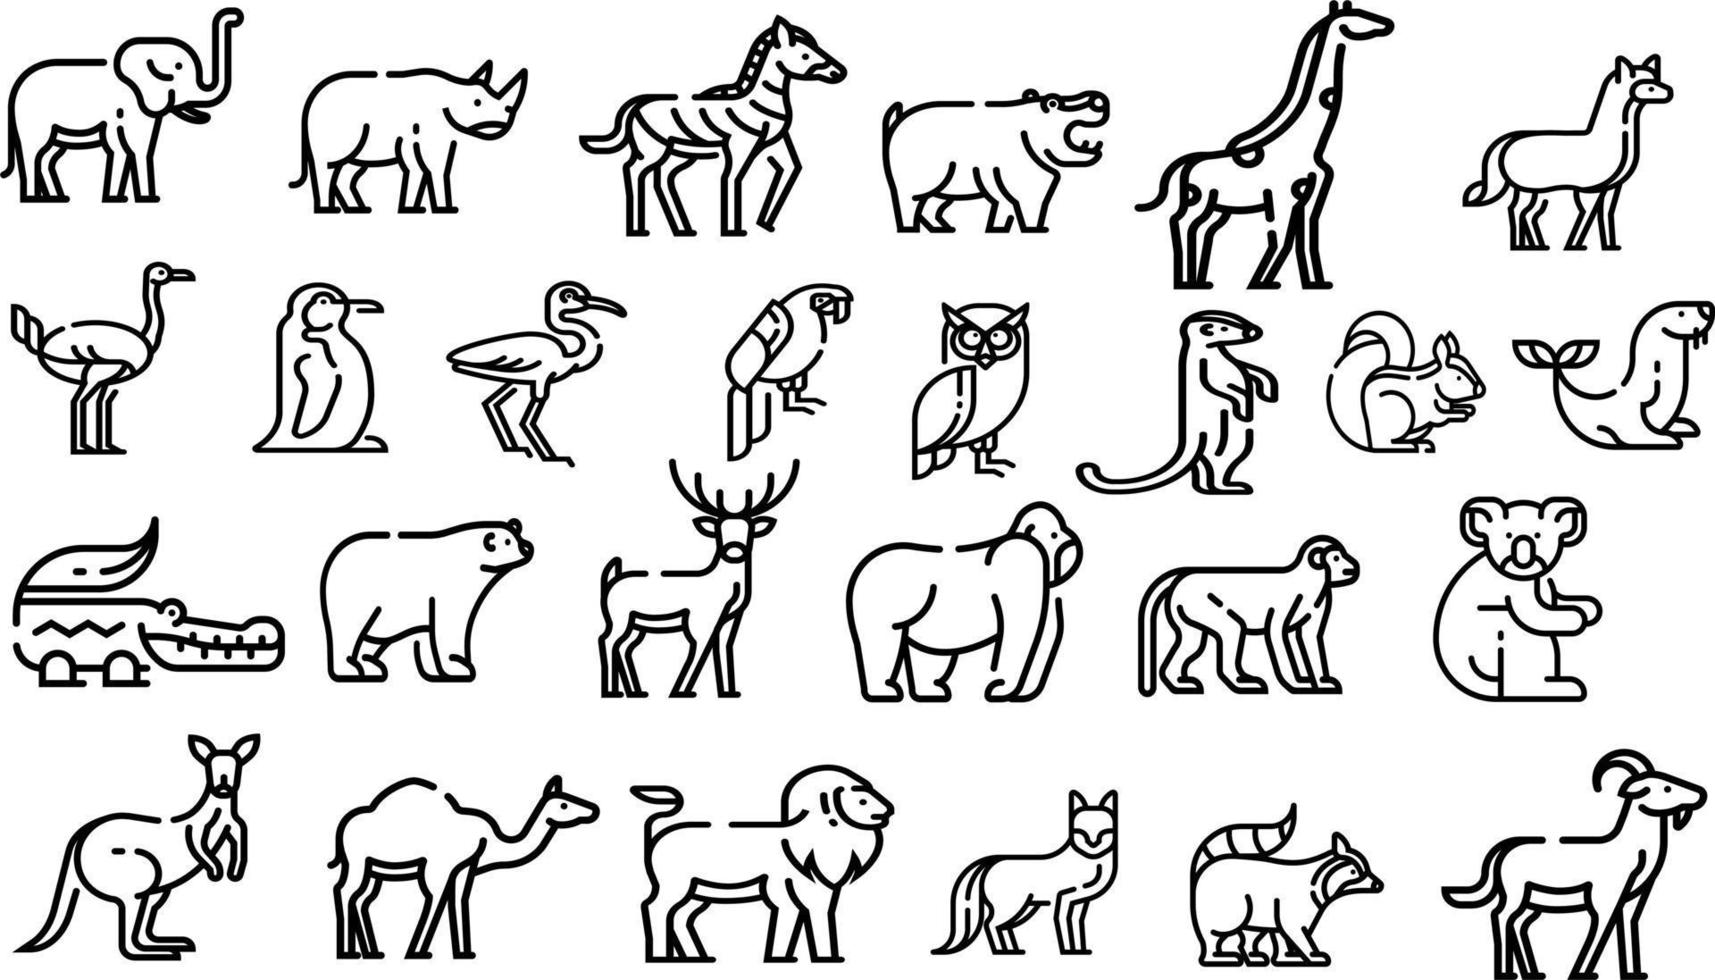 Animals elements set, collection of coloring book templates, the group of outline digital vector illustration, kid educational game page lion wolf elephant crocodile bird monkey rhino deer squirrel